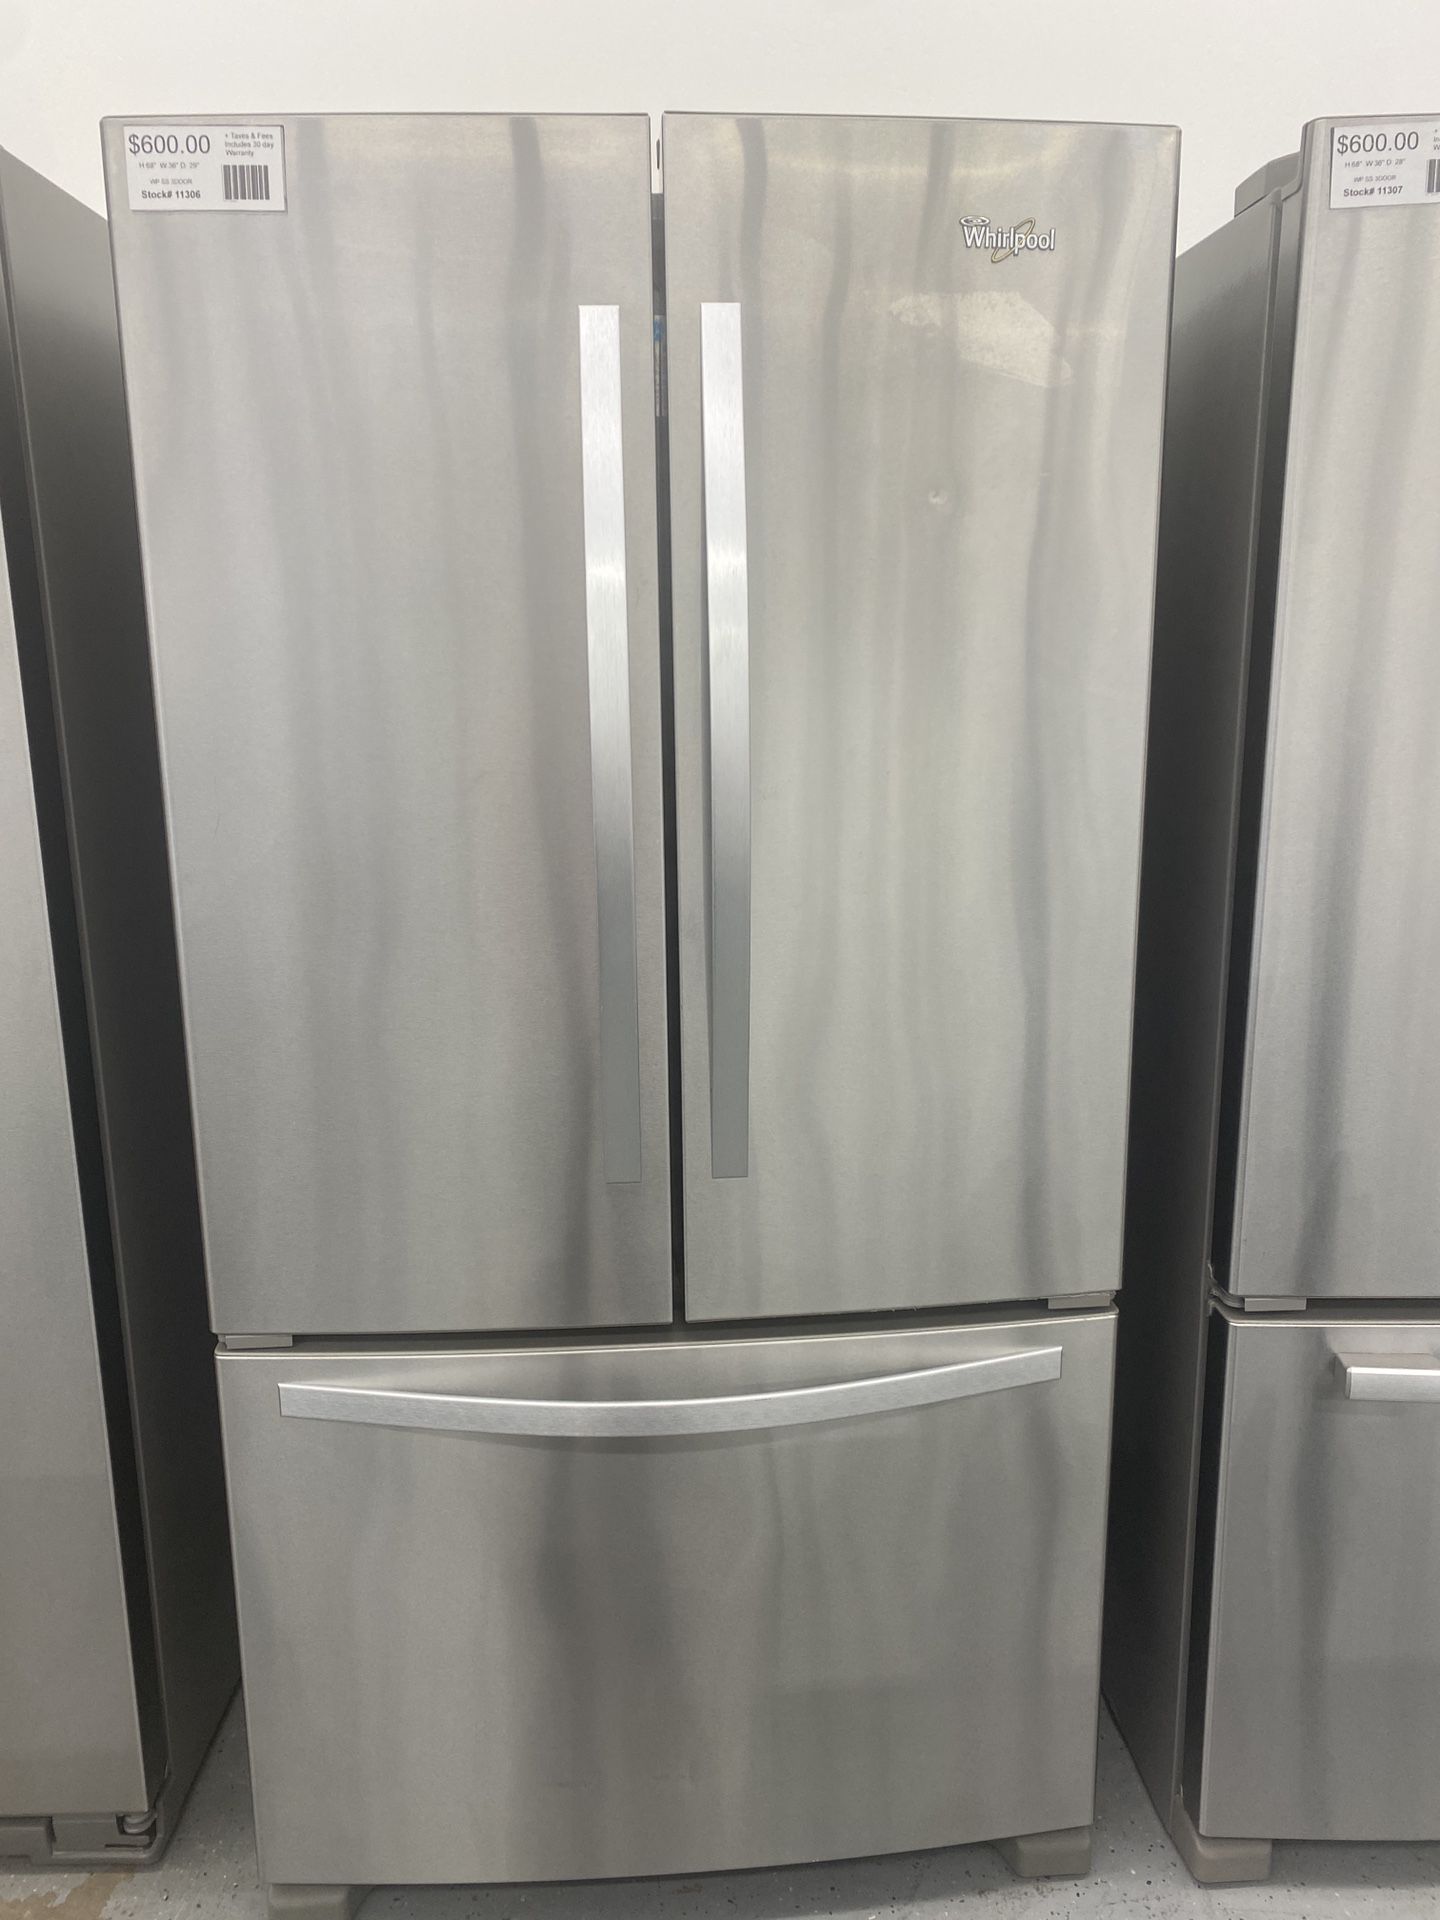 Stainless Steel Whirlpool French Door Refrigerator with Freezer Drawer